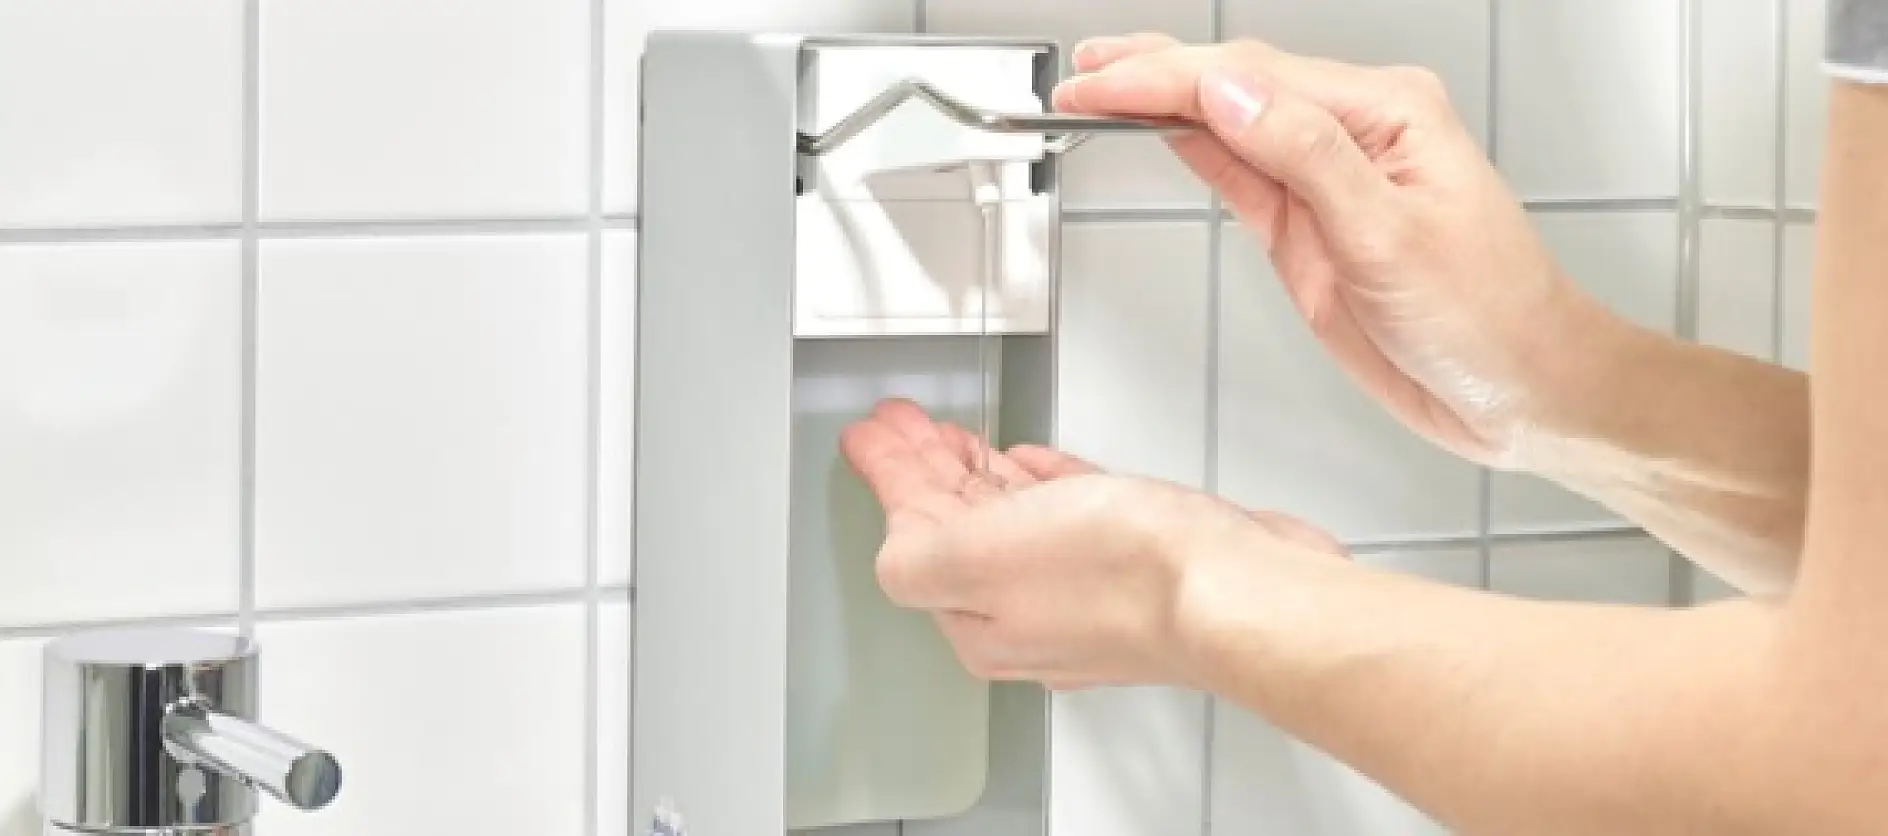 Mount Hand Sanitizer Dispensers in Key Areas for Easy Access